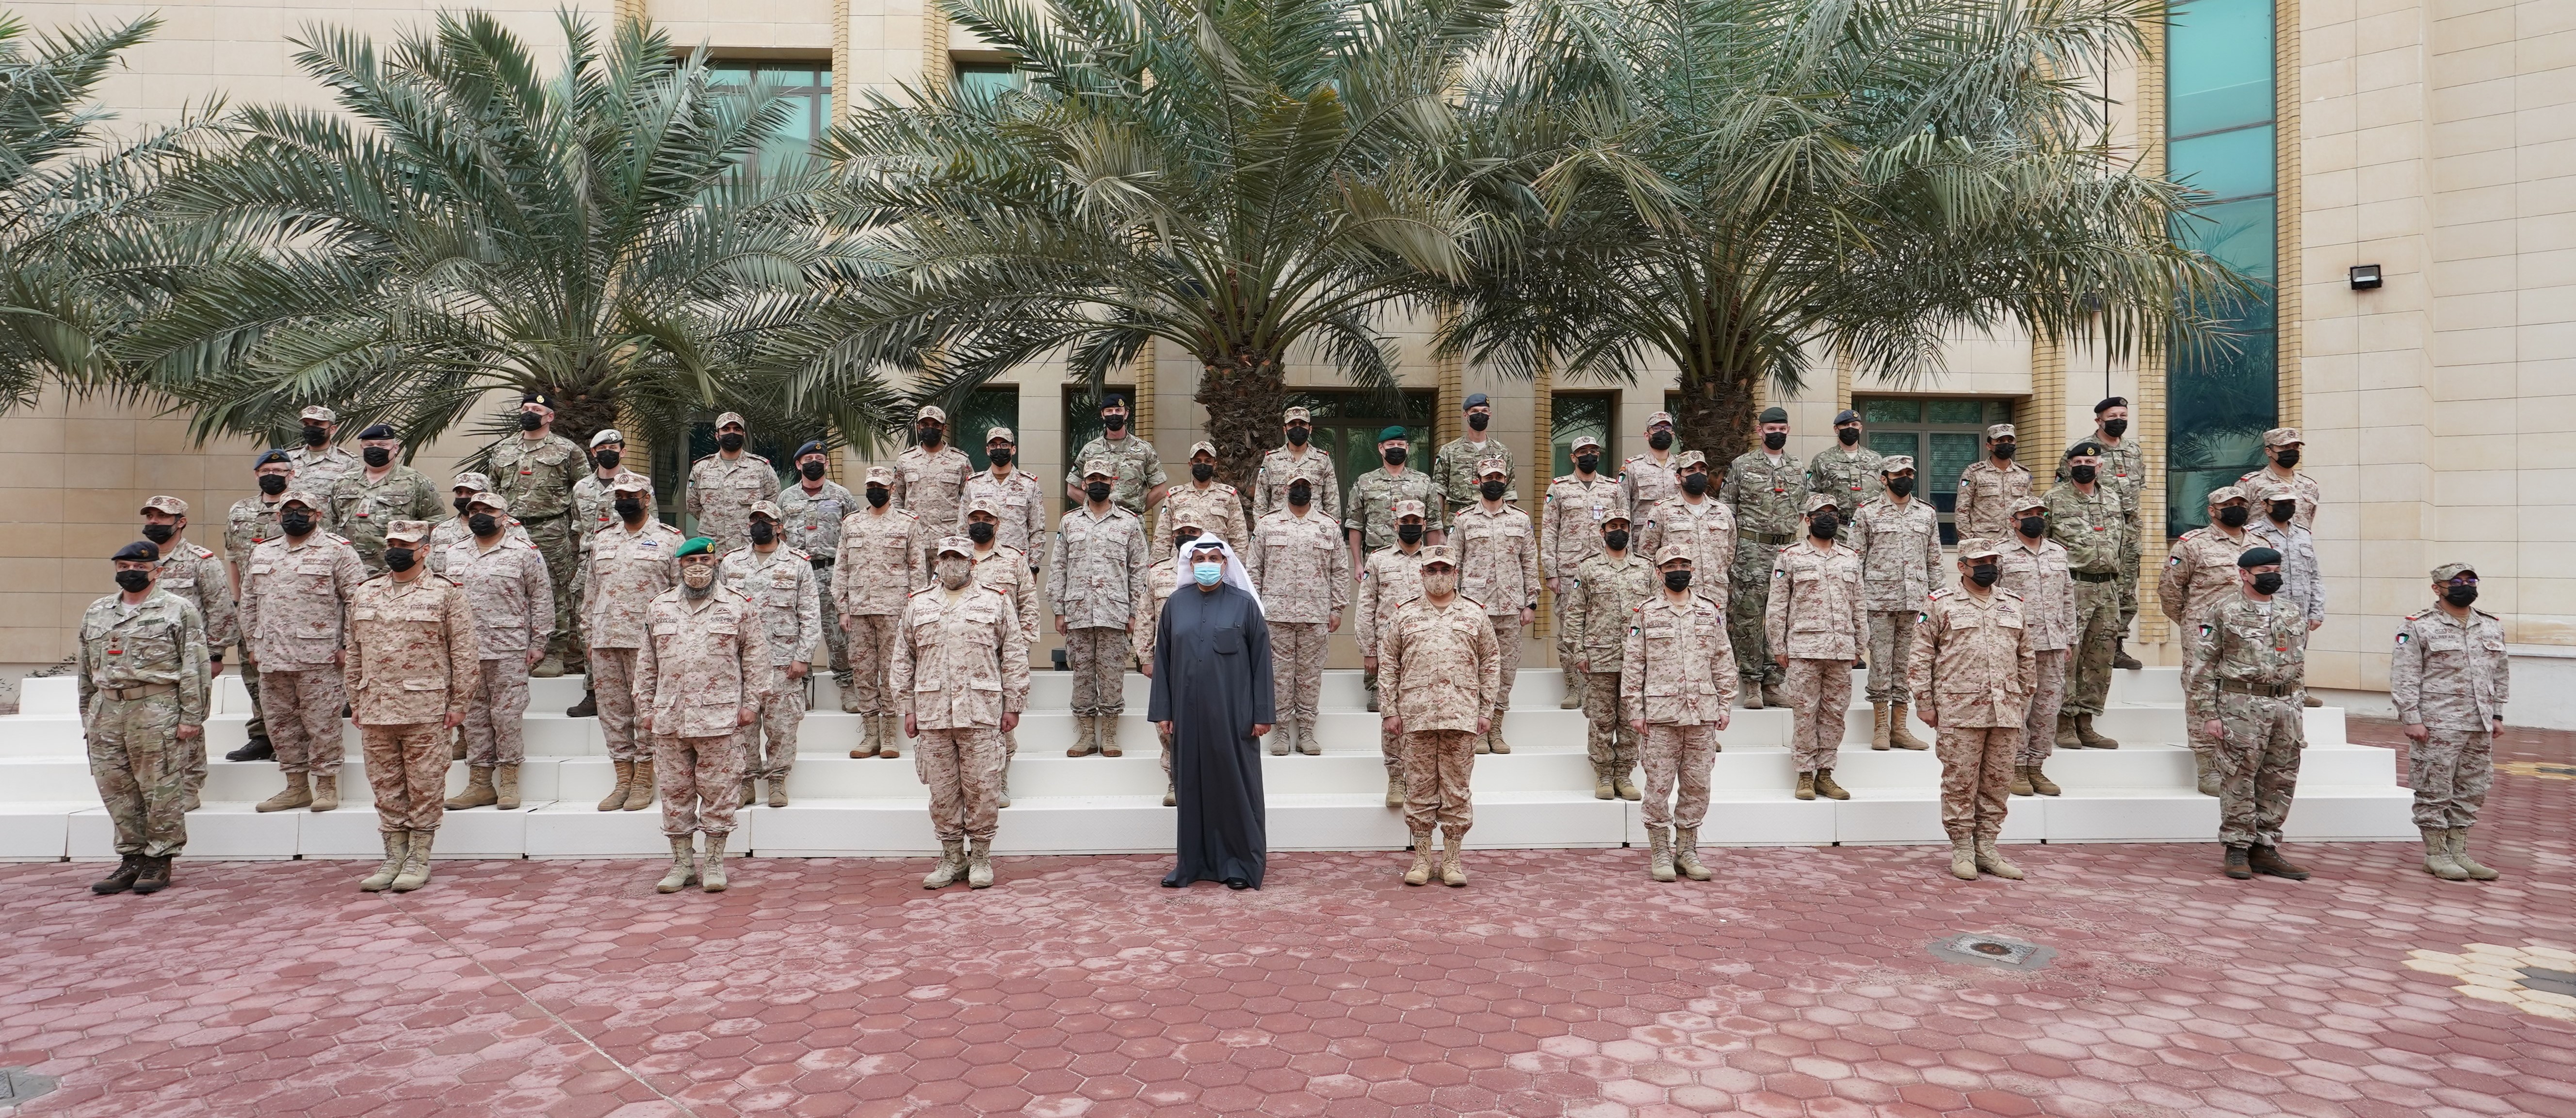 KUWAIT: Deputy Prime Minister and Minister of Defense Sheikh Hamad Jaber Al-Ali Al-Sabah in a group photo during his visit to the Mubarak Al-Abdullah Joint Command and Staff College. - Defense Ministry photosn